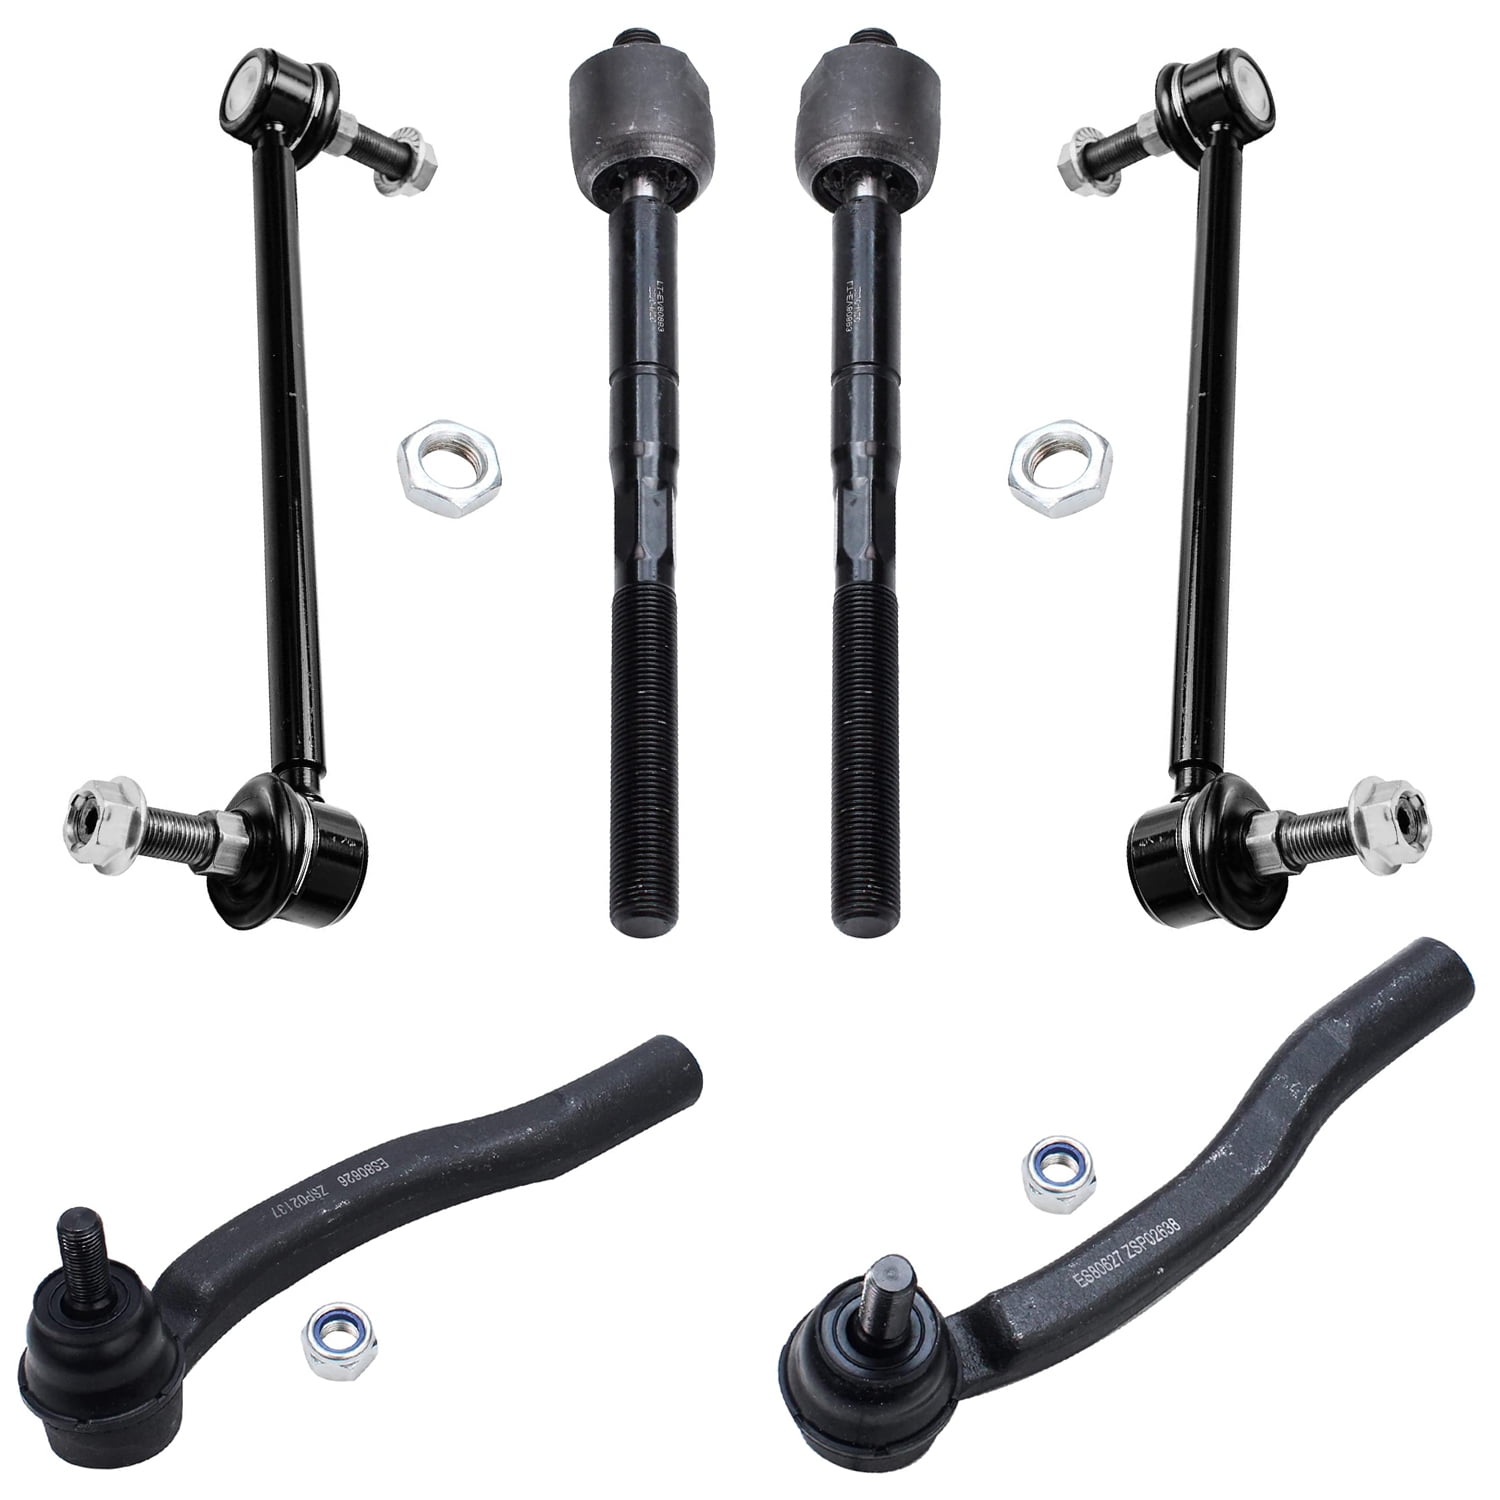 Detroit Axle 10-Year Warranty- Both Stabilizer Bar End Links 2 All Complete 6pc Front Suspension Kit 4 Inner & Outer Tie Rod 